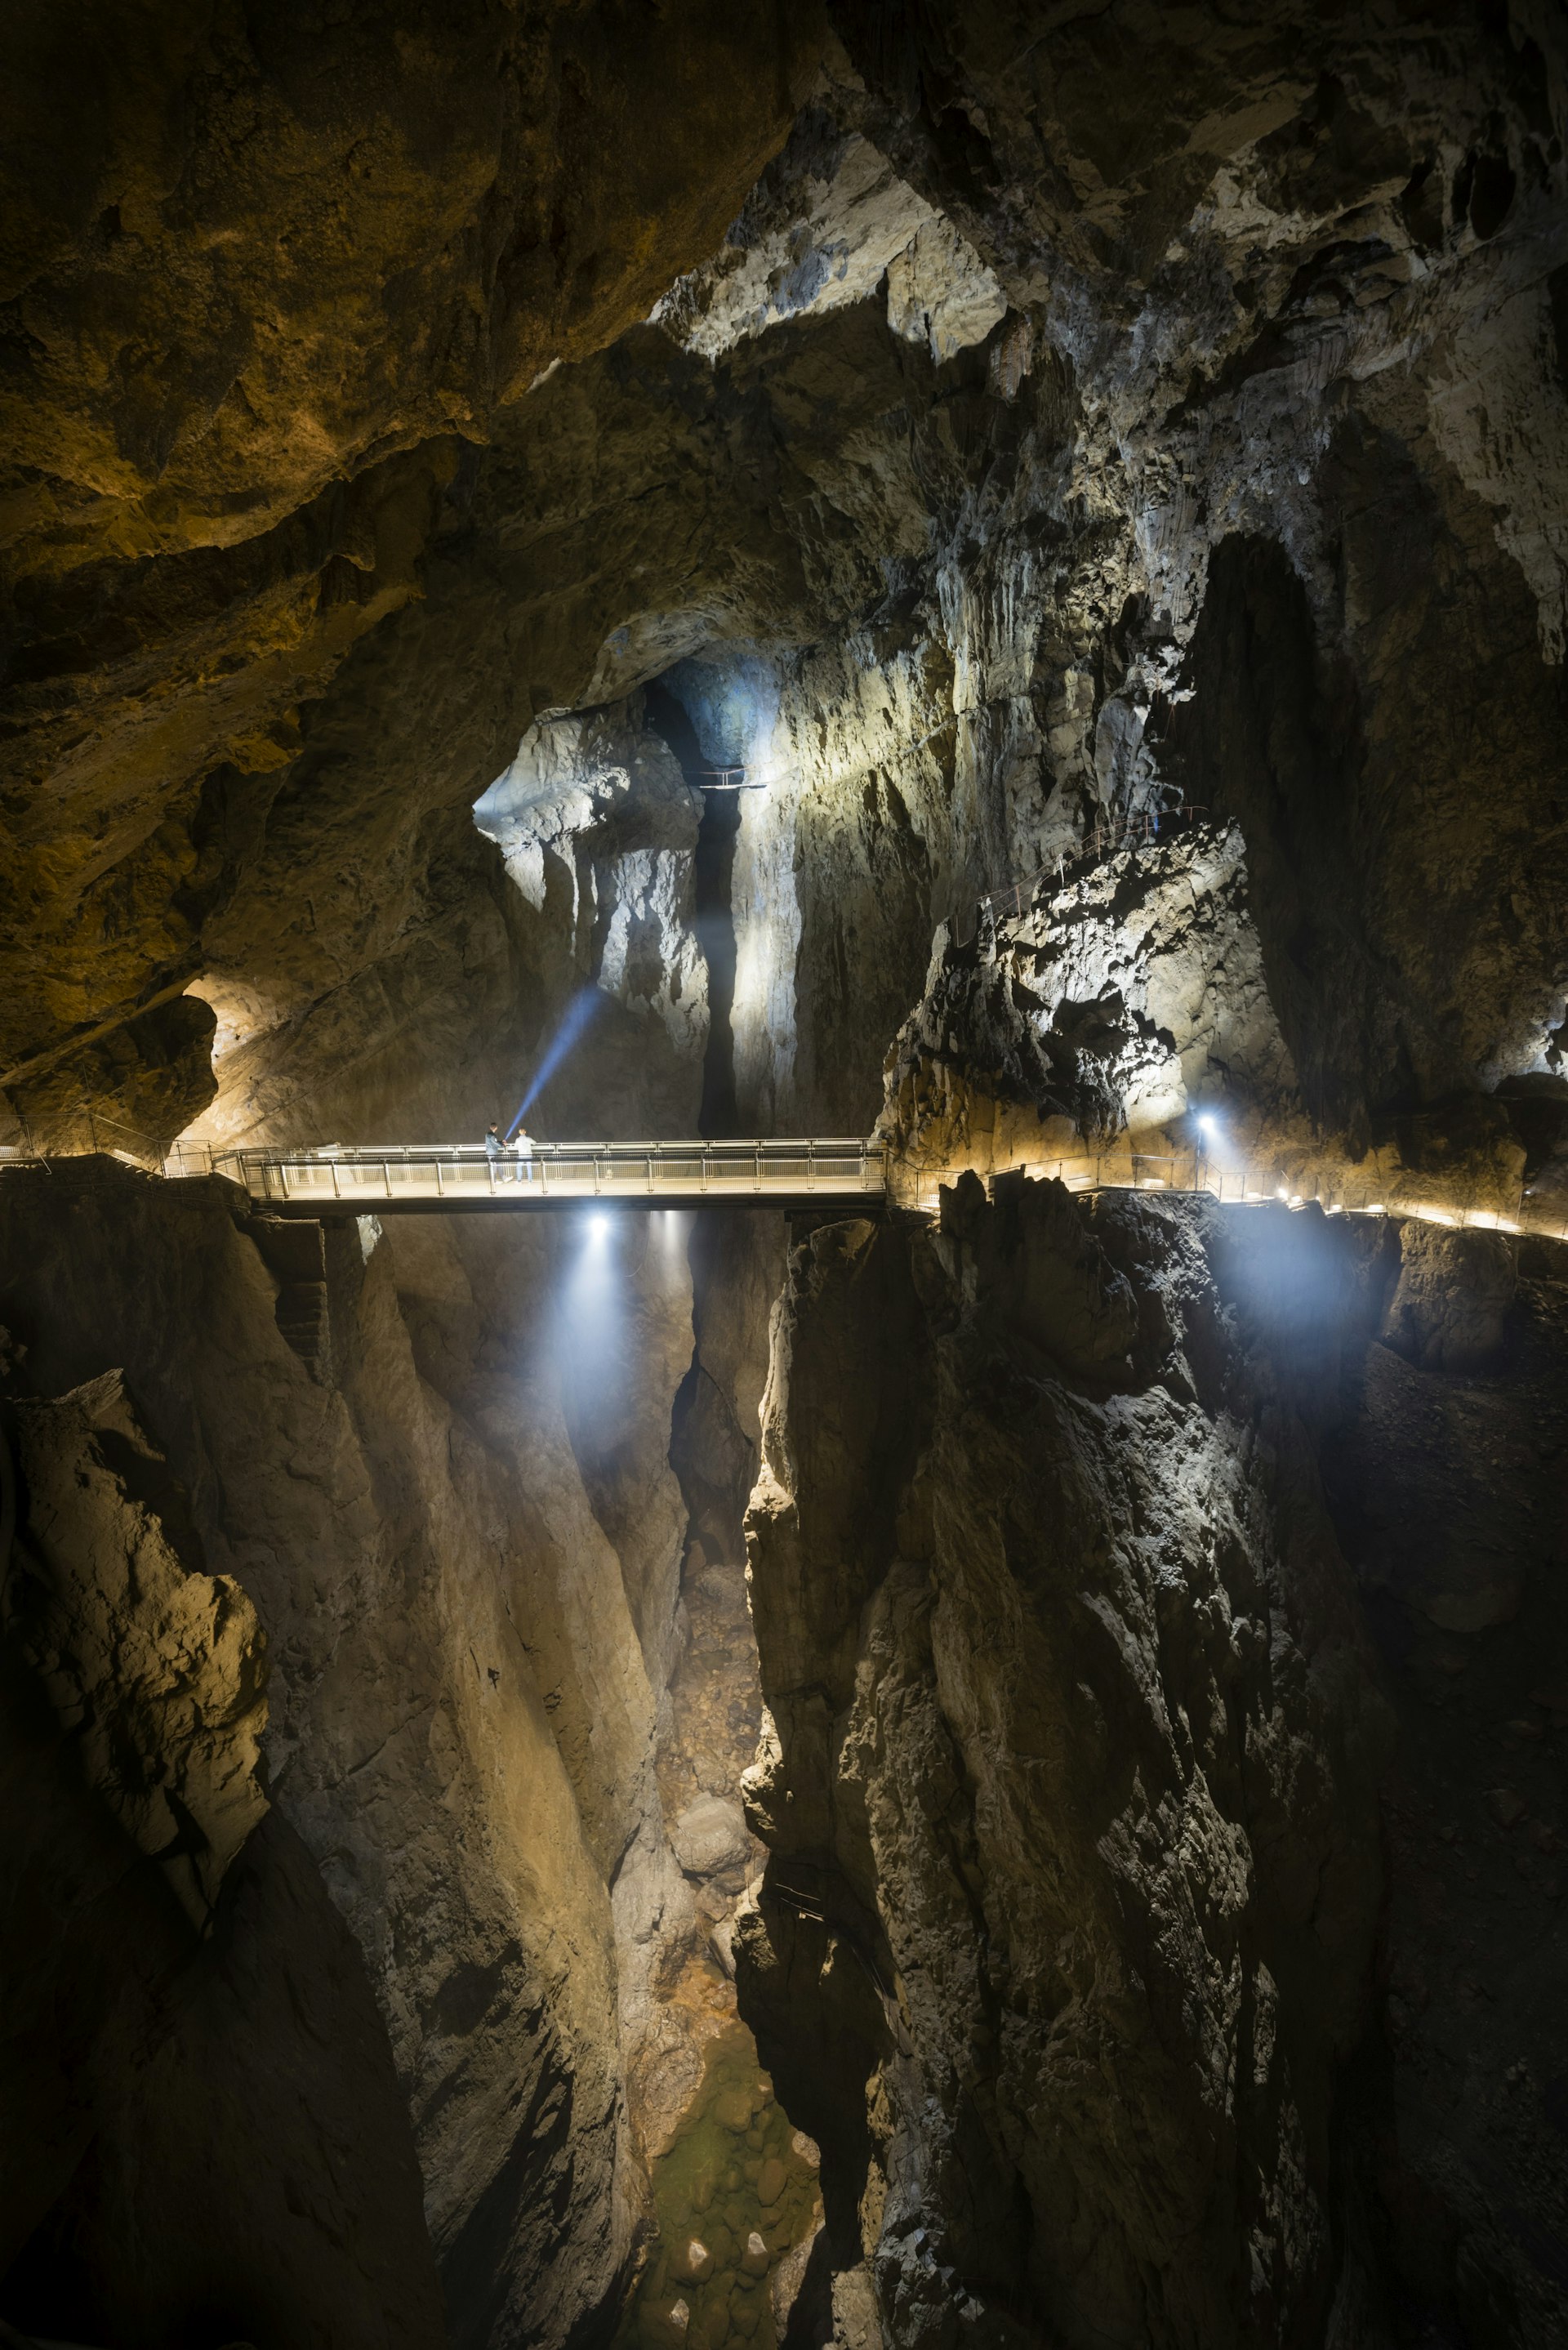 A bridge in the Škocjan Caves above the Reka River, which flows for 21 miles underground.